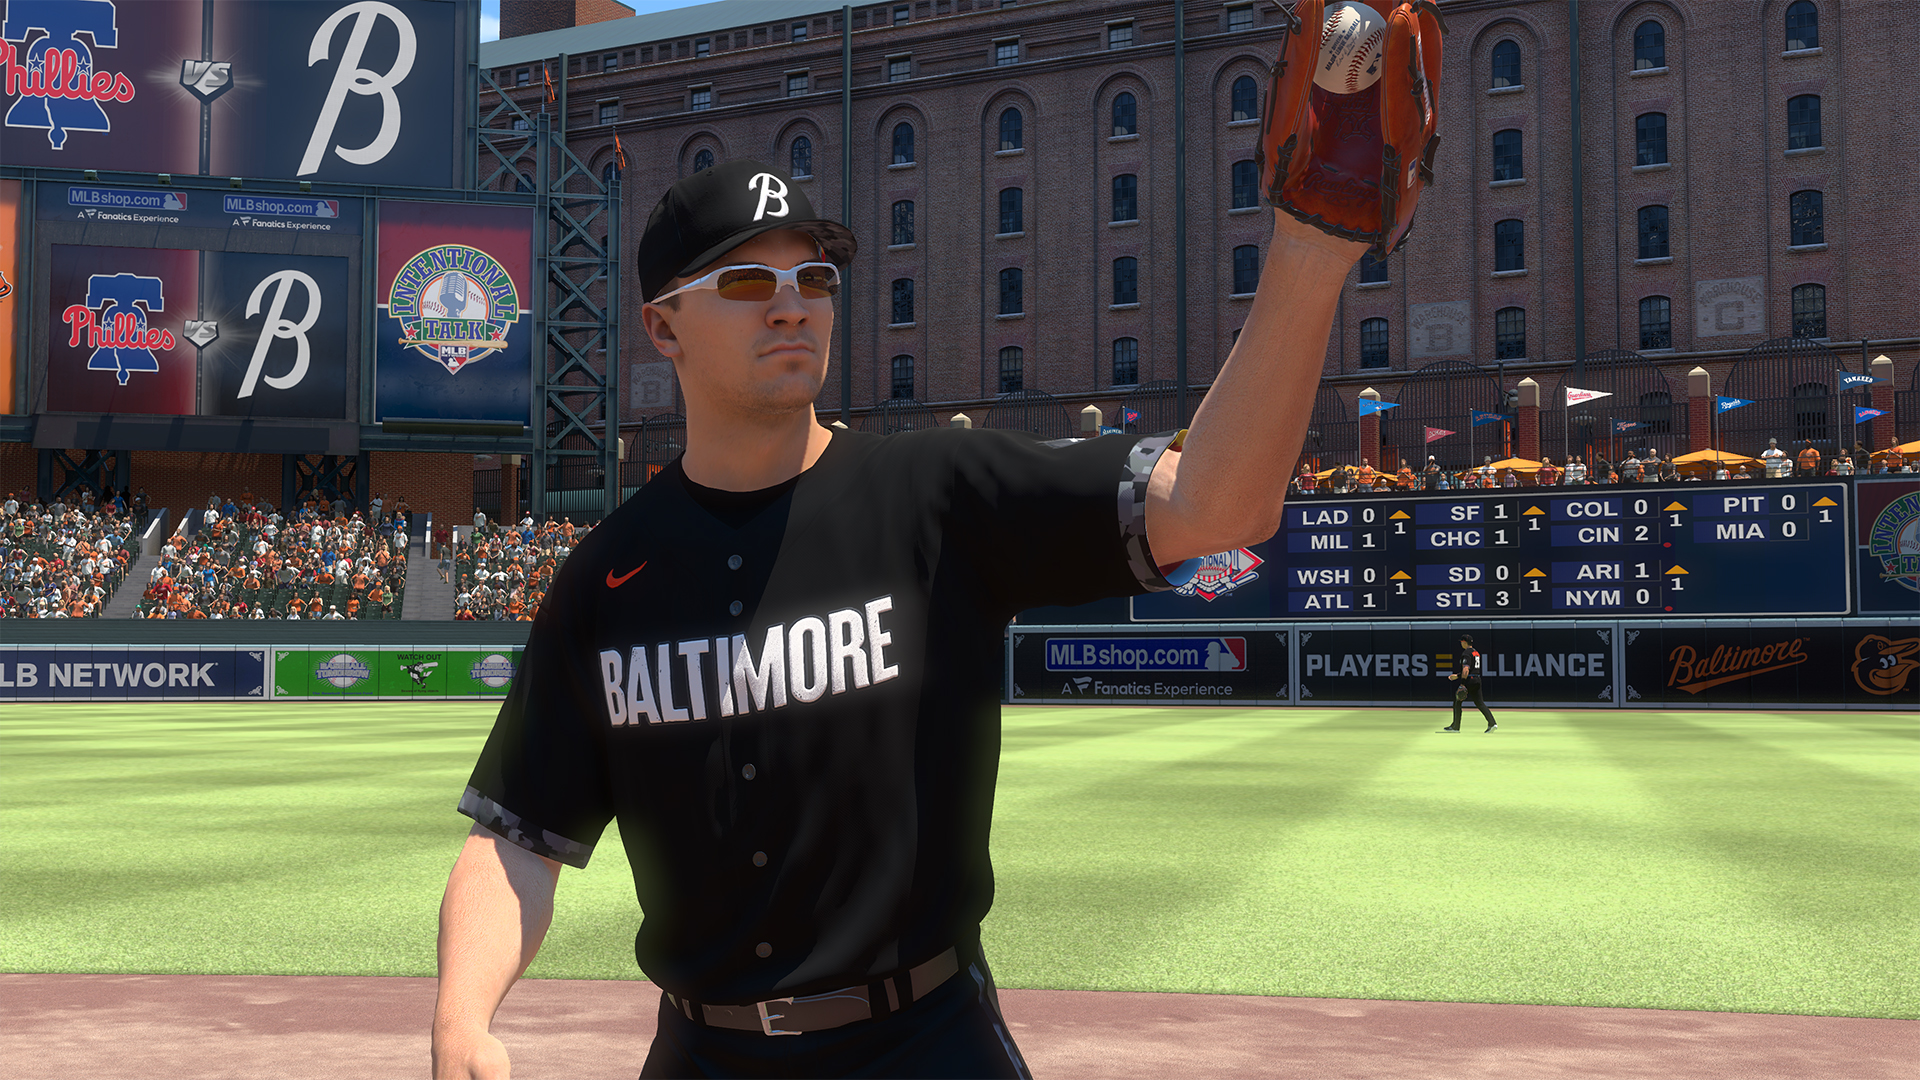 MLB The Show 23 Update 1.06 Patch Notes, Uniforms and Fixes - News